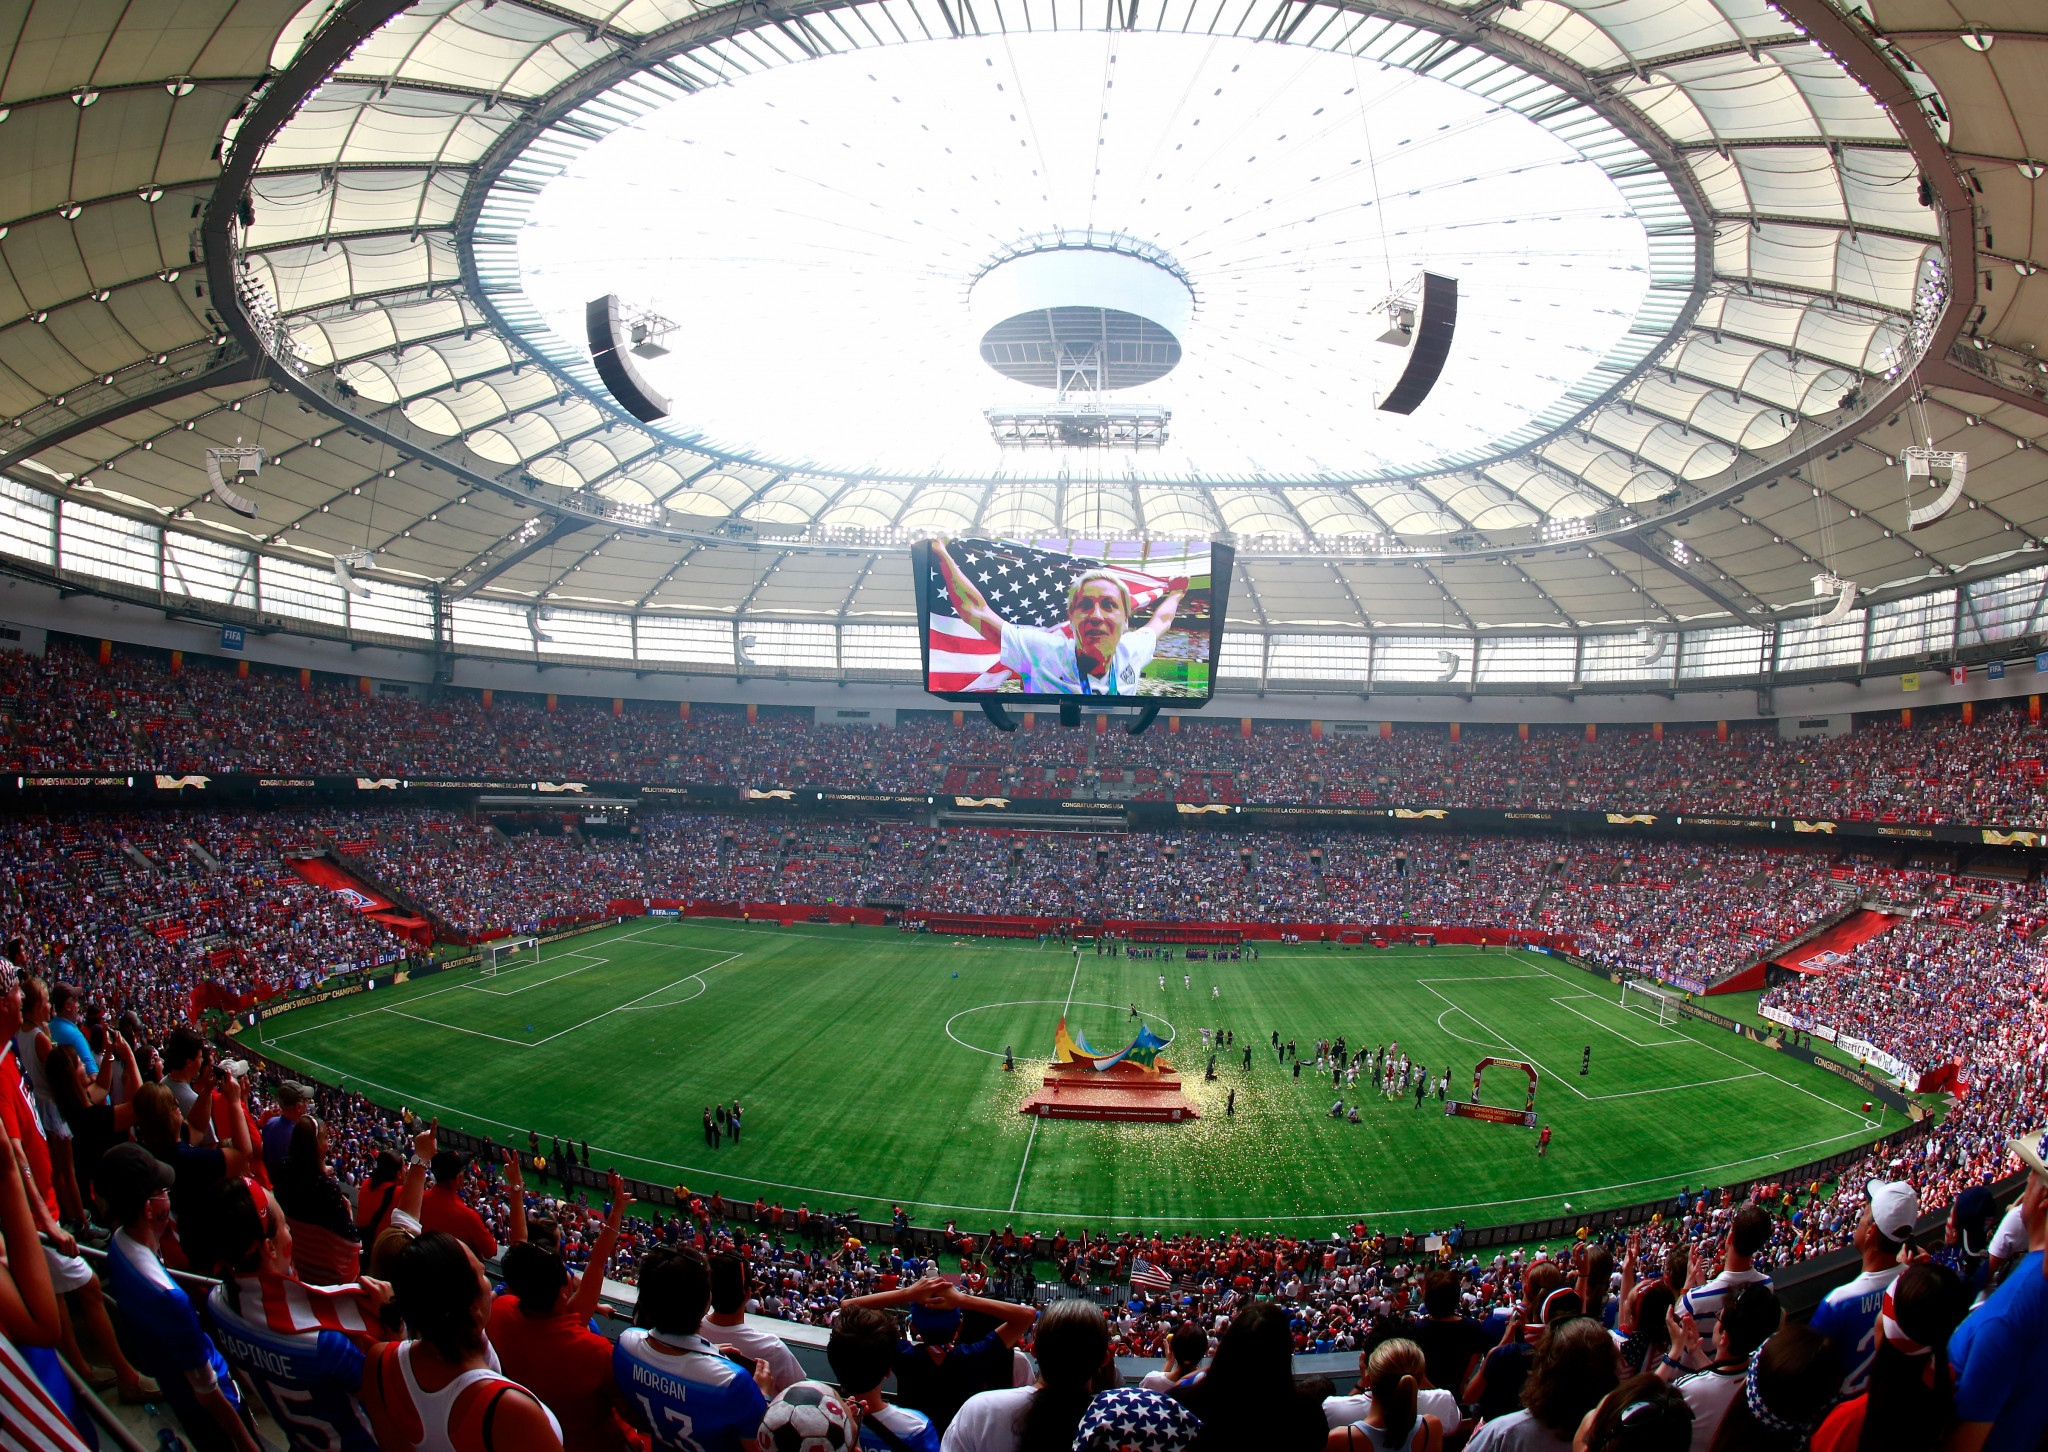 Vancouver has been approved as a candidate host city for the 2026 FIFA World Cup with BC Place serving as its venue ©Getty Images